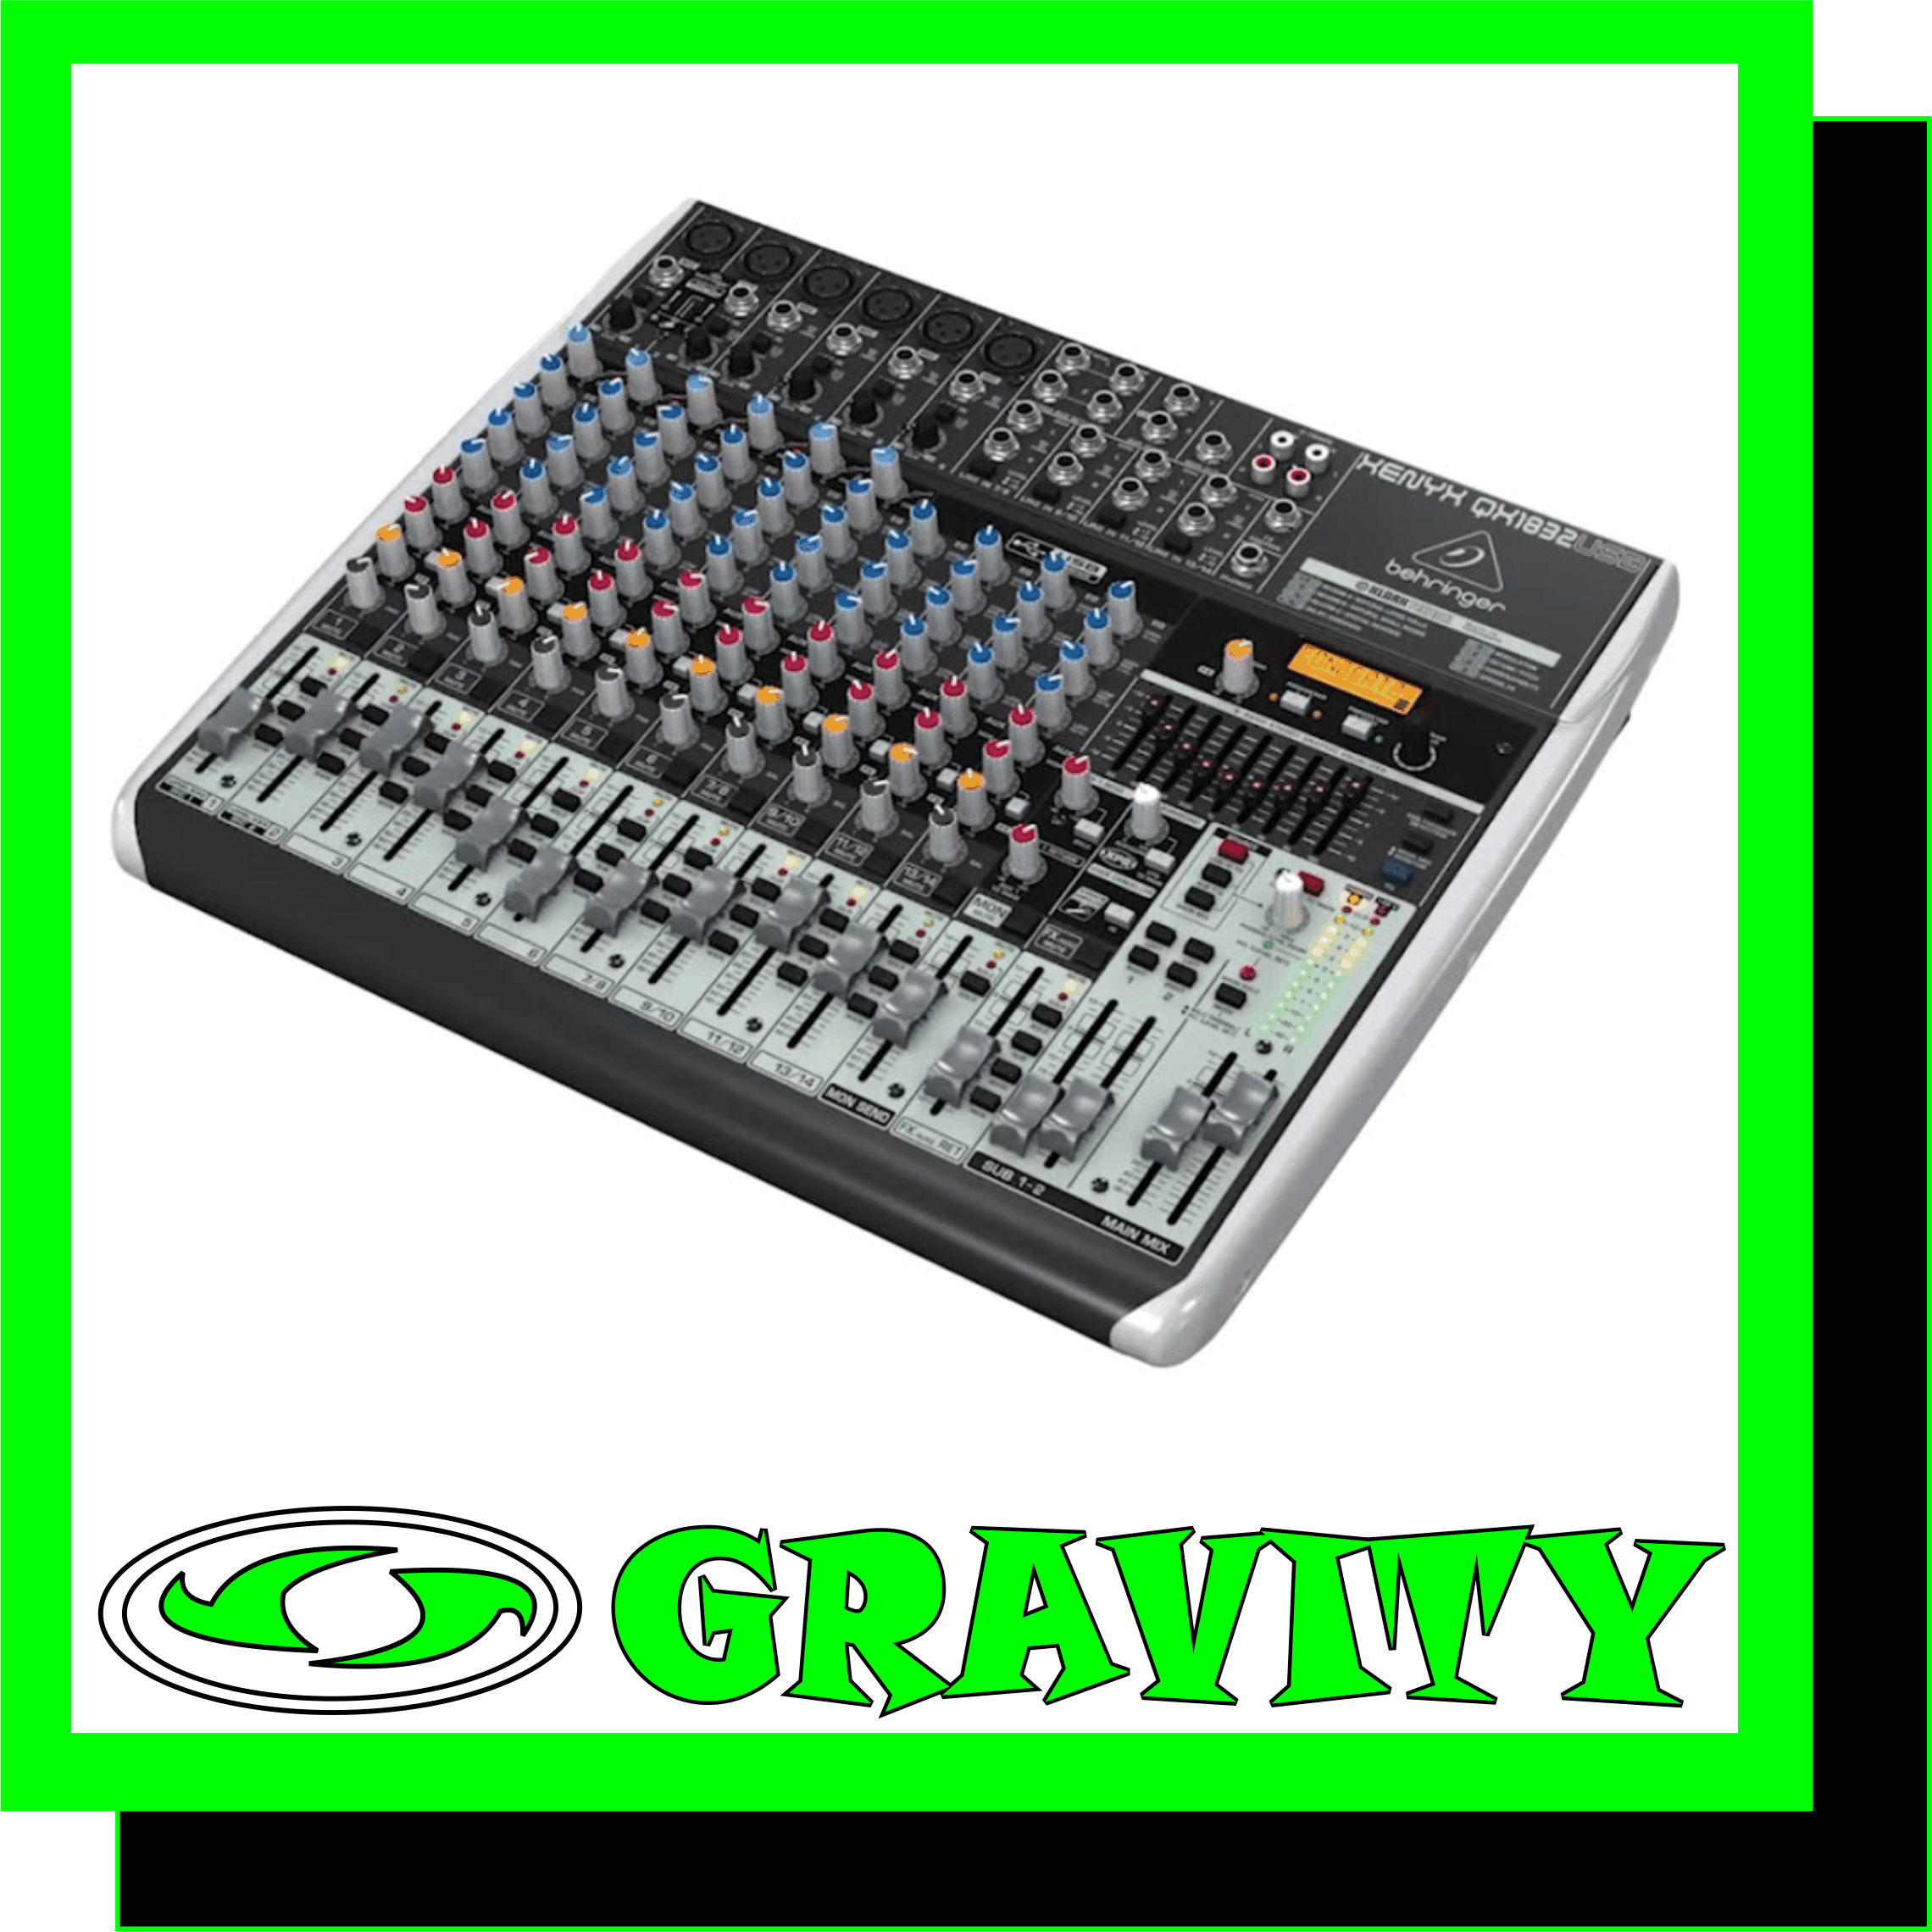 XENYX QX1832USB Premium 18-Input 3/2-Bus Mixer with XENYX Mic Preamps & Compressors, KLARK TEKNIK Multi-FX Processor, Wireless Option and USB/Audio Interface  Product Features: -Premium ultra-low noise, high headroom mixer -6 state-of-the-art, phantom-powered XENYX Mic Preamps comparable to stand-alone boutique preamps -6 studio-grade compressors with super-easy “one-knob” functionality and control LED for professional vocal and instrumental sound -Ultra-high quality KLARK TEKNIK FX processor with LCD display, dual-parameters, Tap function and storable user parameter settings -“Wireless-ready” for high-quality BEHRINGER digital wireless system (not included) -Built-in stereo USB/Audio Interface to connect directly to your computer. Free audio recording, editing and podcasting software plus 150 instrument/effect plug-ins    downloadable at behringer.com -Neo-classic “British” 3-band EQs with semi-parametric mid band for warm and musical sound -9-band stereo graphic EQ allows precise frequency correction of monitor or main mixes -Revolutionary FBQ Feedback Detection System instantly reveals critical frequencies -Breathtaking XPQ 3D stereo surround effect for more vitality and enhanced stereo image -Voice Canceller function for easy-to-use sing-along applications -Channel inserts on each mono channel for flexible connection of outboard equipment -3 aux sends per channel: 1 pre fader for monitoring, 1 pre/post fader switchable for monitoring/FX applications, 1 post fader (for internal FX or as external send) -Clip LEDs, mute, main mix and subgroup routing switches, solo and PFL functions on all channels -2 subgroups with separate outputs for added routing flexibility and 2 multi-functional stereo aux returns with flexible routing -Balanced main mix outputs with gold-plated XLR connectors, headphone/control room output and stereo rec outputs -Long-wearing 60-mm logarithmic-taper faders and sealed rotary controls -“Planet Earth” switching power supply for maximum flexibility (100 – 240 V~), noise-free audio, superior transient response plus low power consumption for energy saving -High-quality components and exceptionally rugged construction ensure long life -Conceived and designed by BEHRINGER Germany